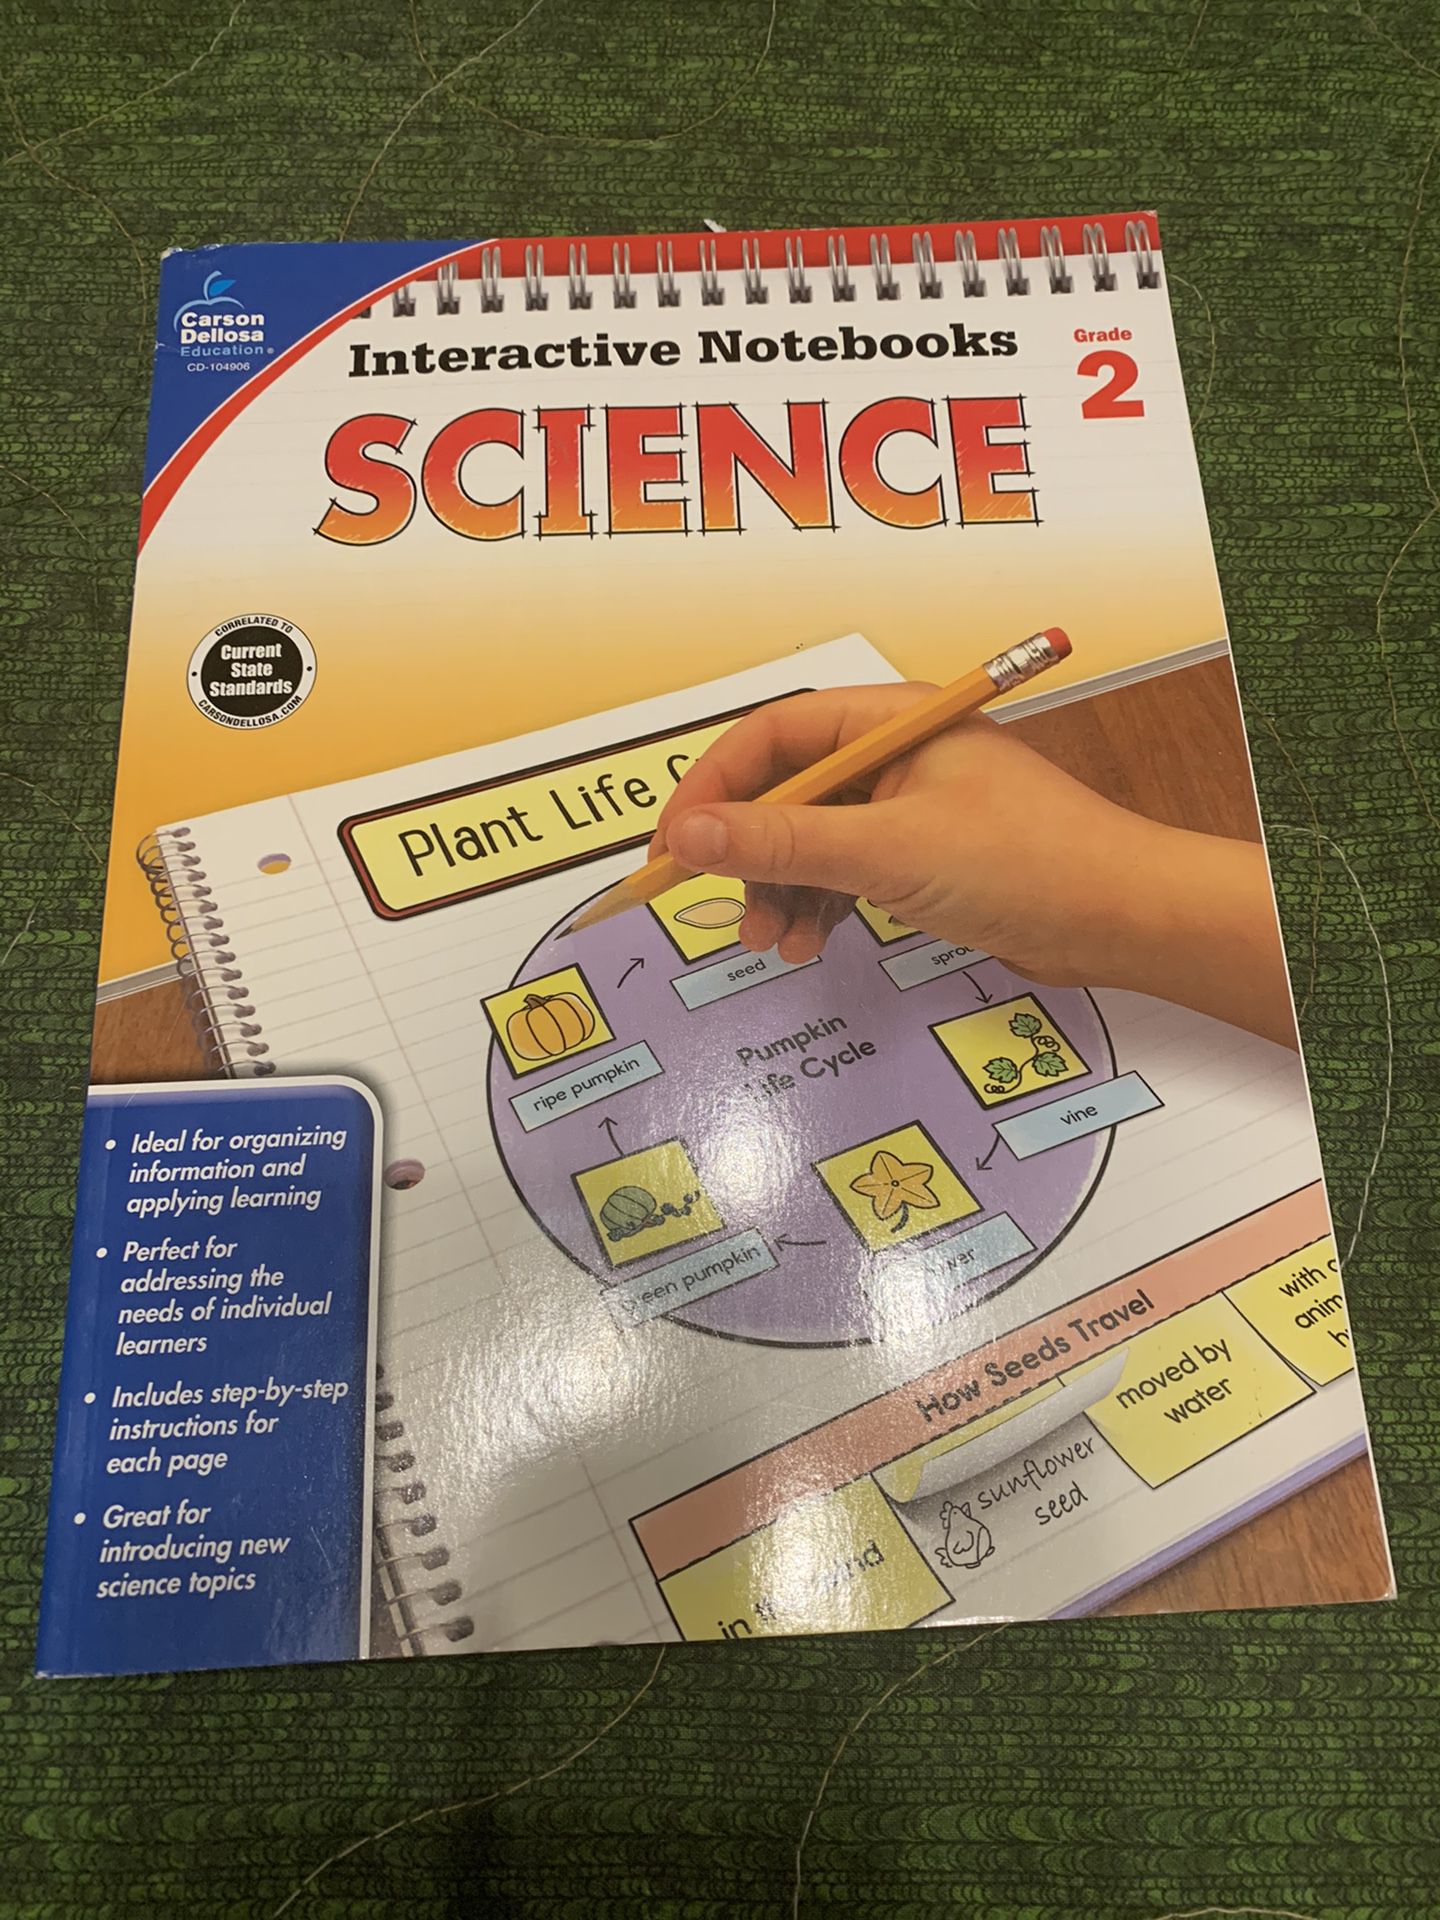 Interactive Notebooks: Science 2